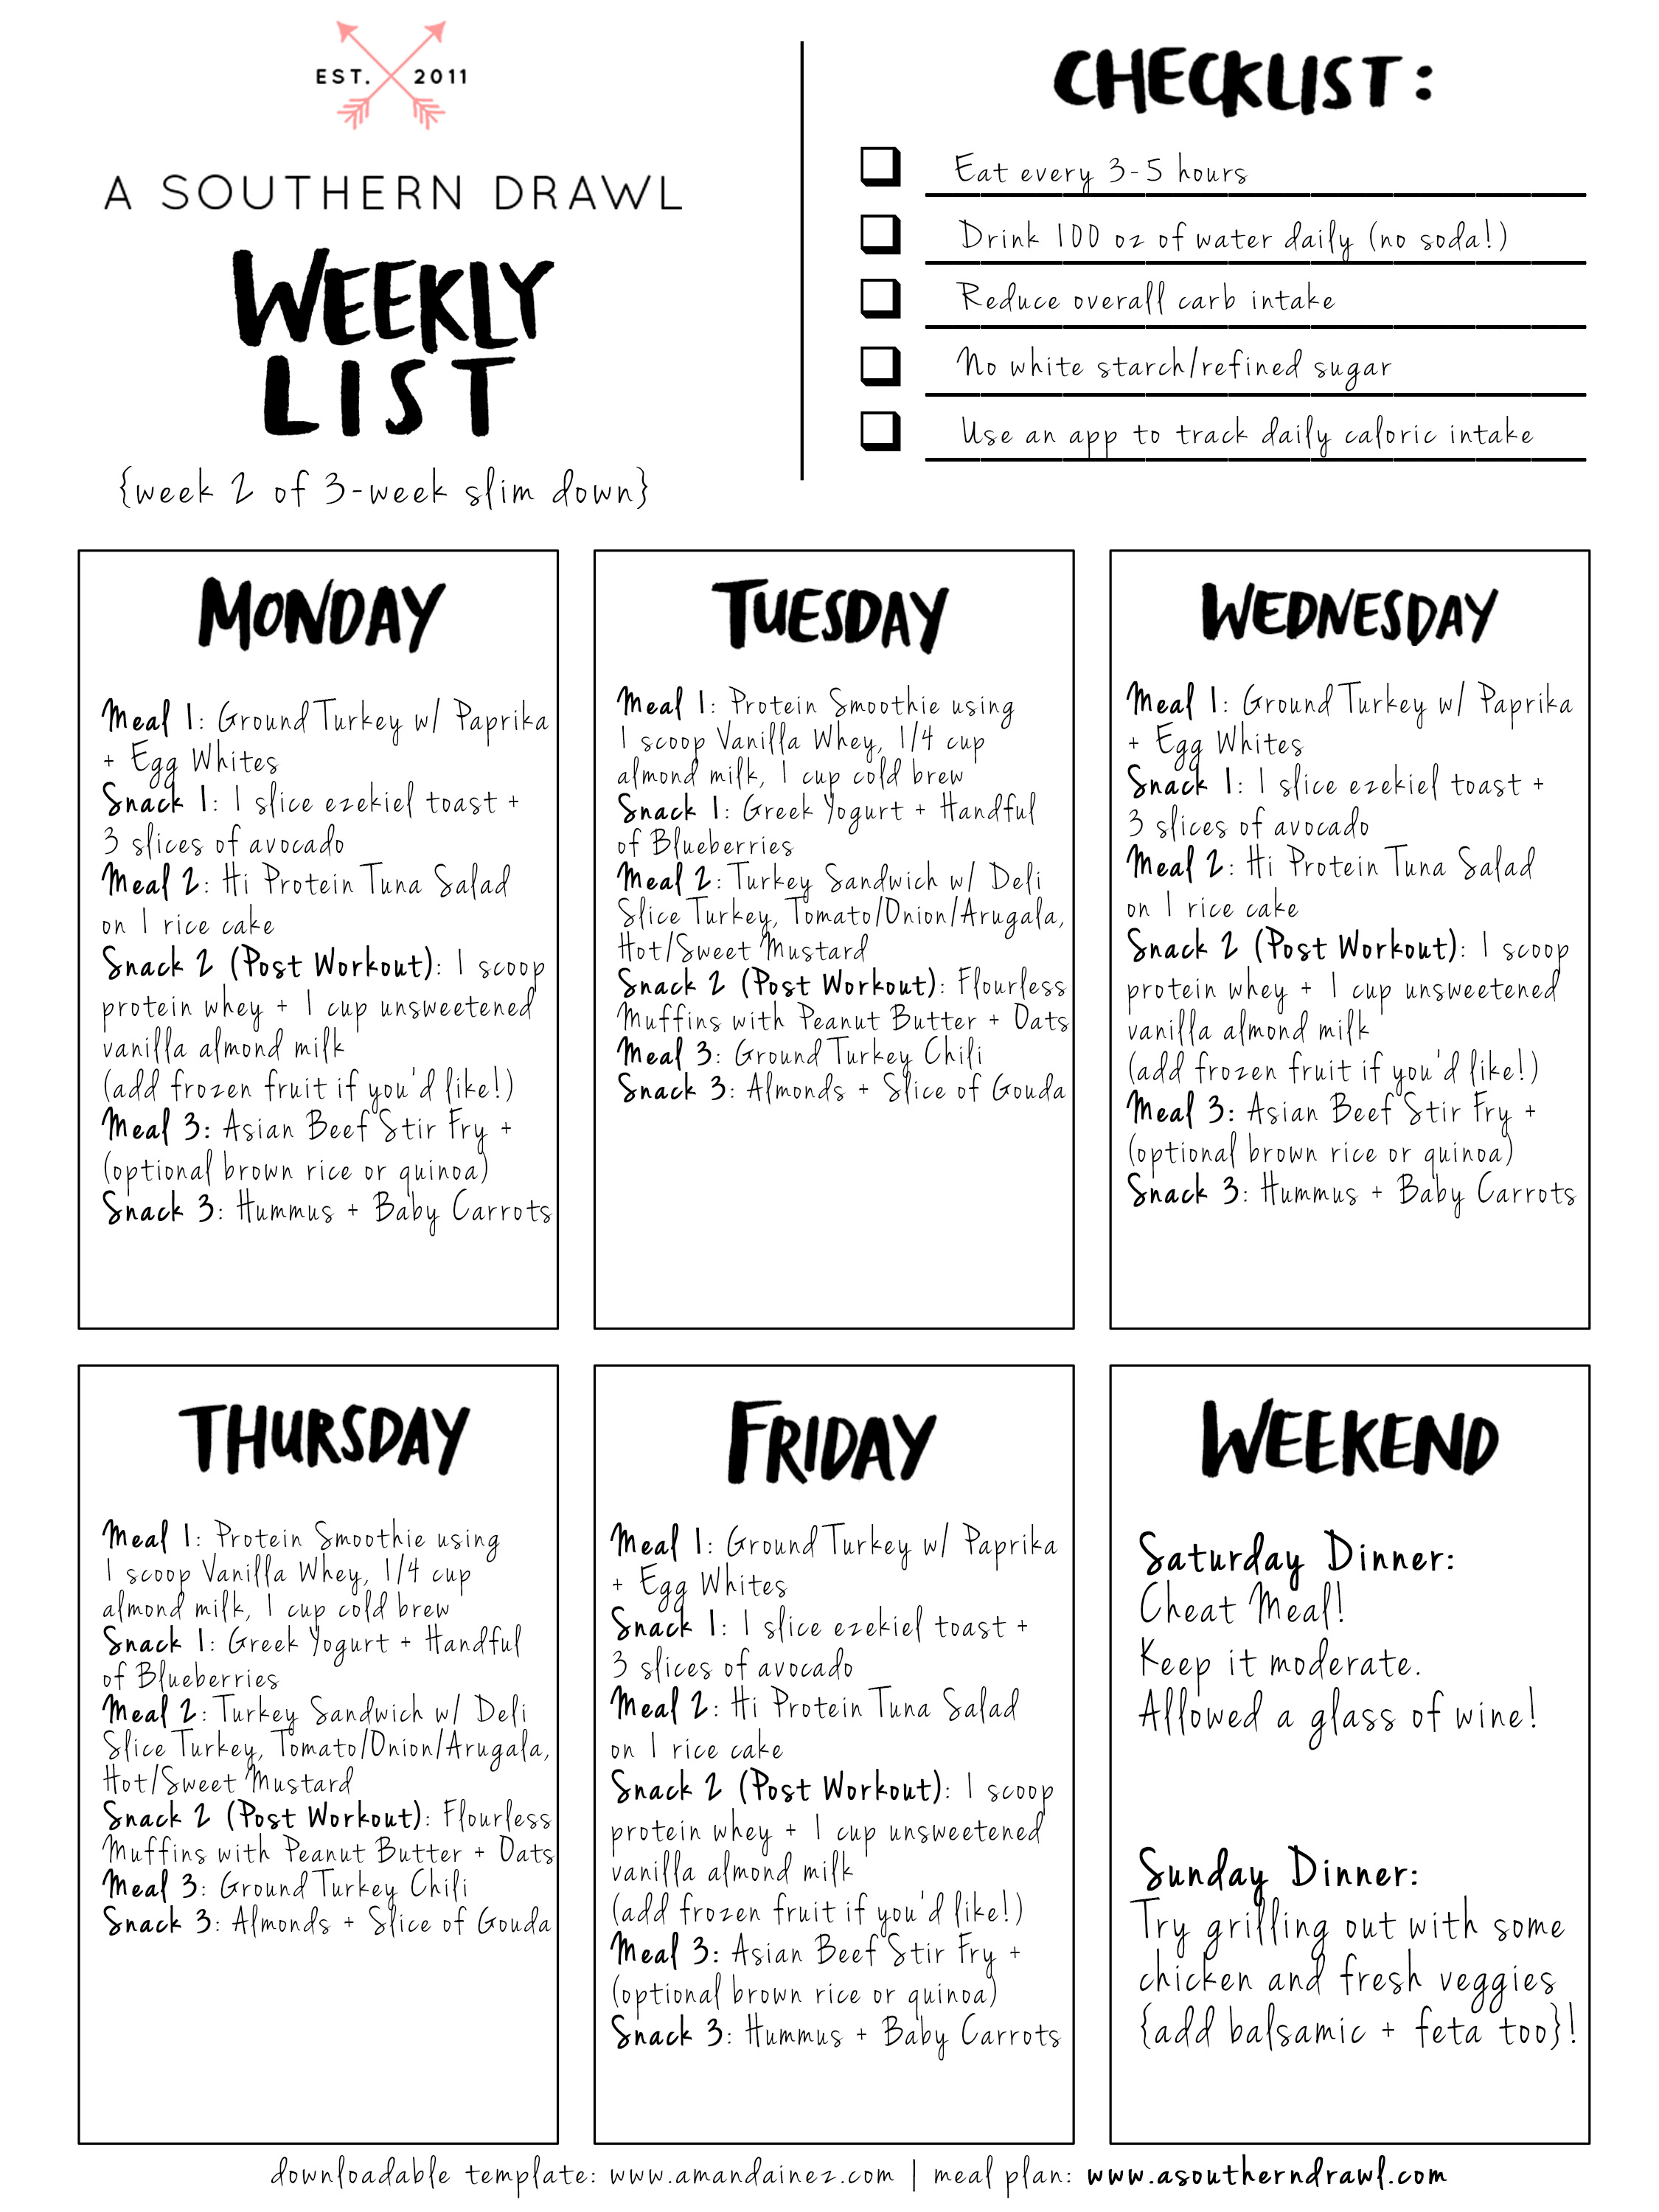 3 week clean eating plan, three week slim down guide, 3 week slim down guide, weekly workout routine, weekly meal prep ideas, activewear, alo moto leggings, athleisure outfit, athleisure fashion, fitness, fitspo, three week diet plan, 21 day diet, 21 day slim down, 21 day meal prep, fitness blogger, kentucky fashion blogger // grace wainwright a southern drawl